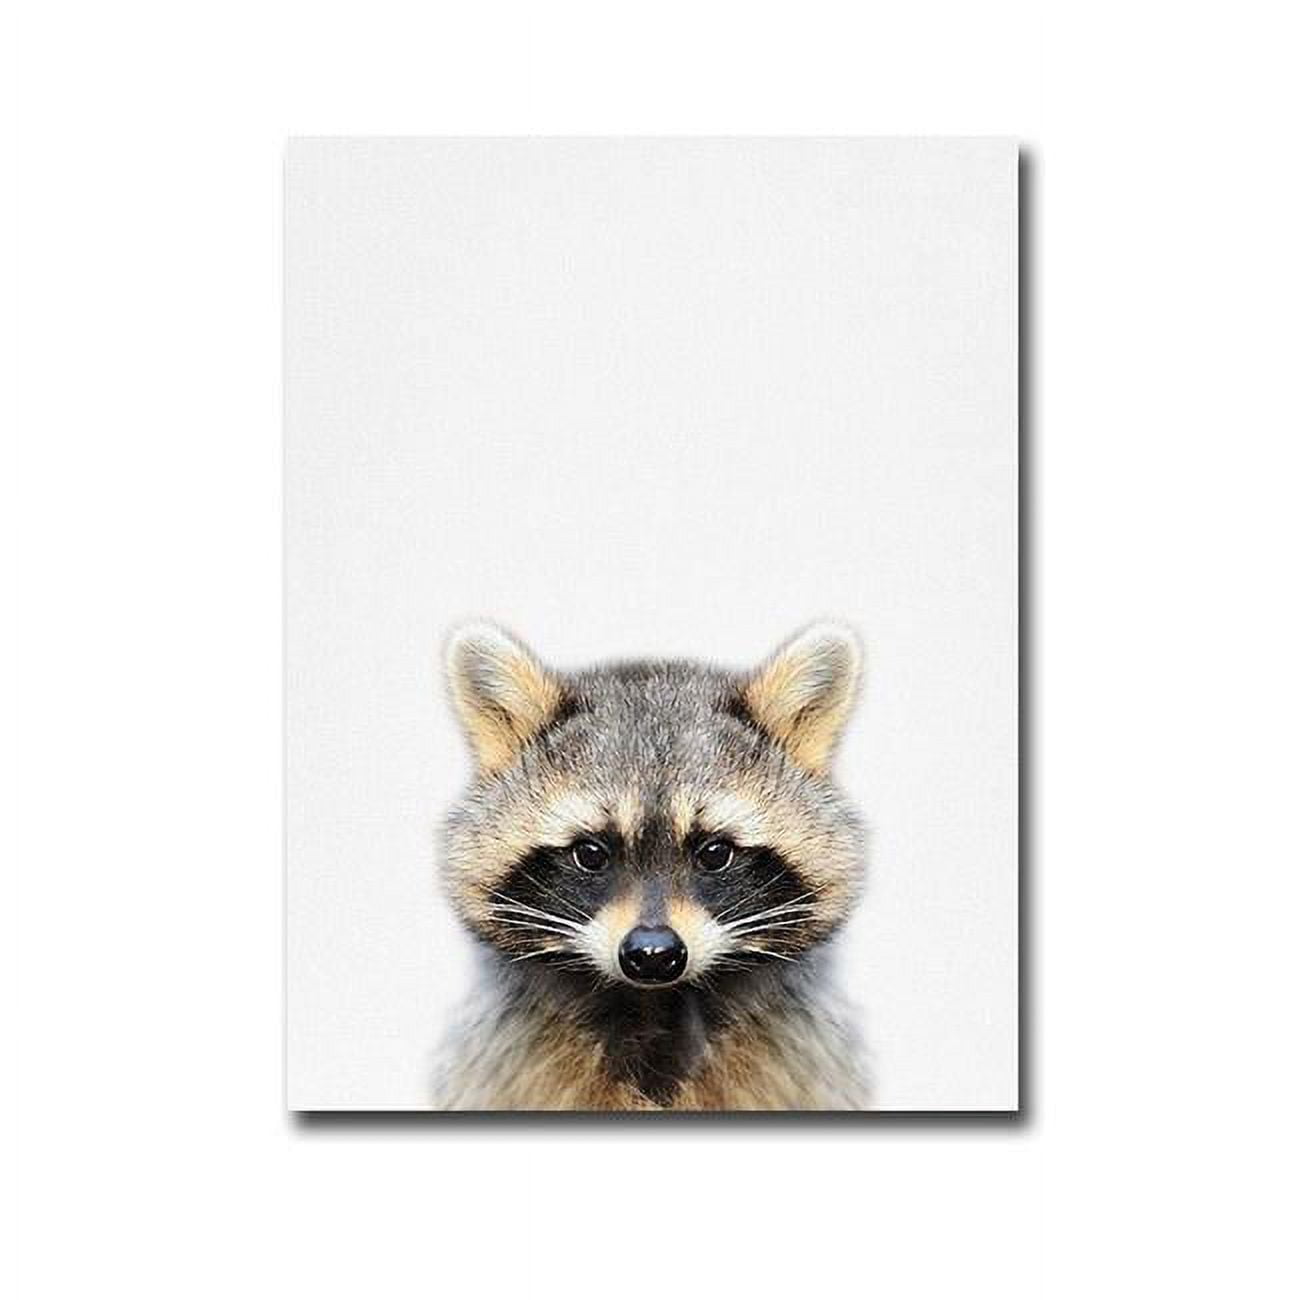 1216u196ig Raccoon By Tai Prints Premium Gallery-wrapped Canvas Giclee Art - 12 X 16 X 1.5 In.